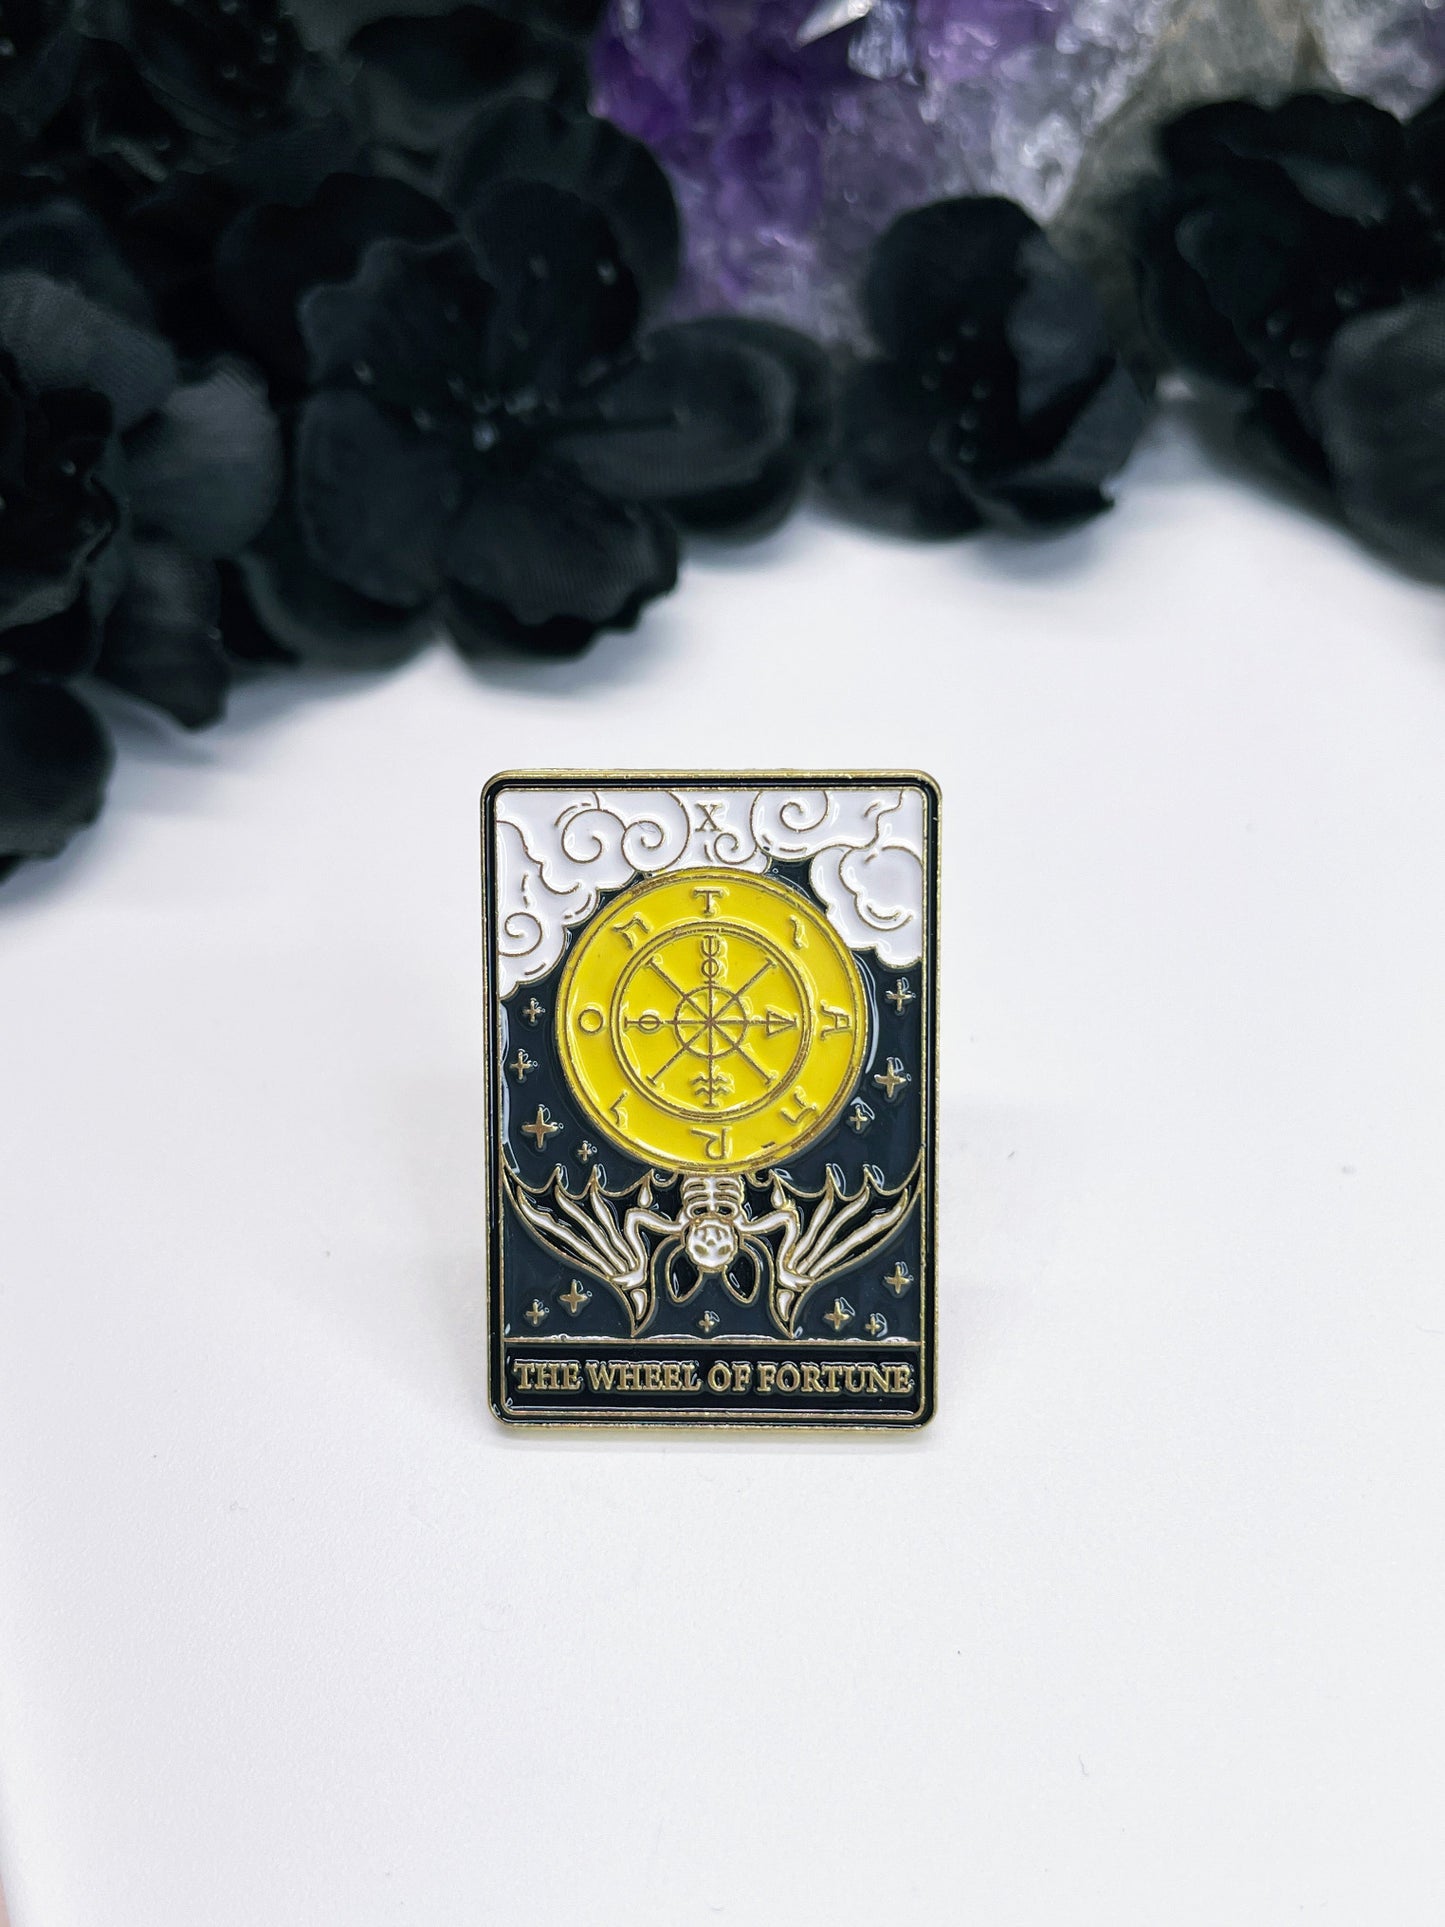  An enamel pin featuring a tarot card with a wheel and a bat on it, the card is "The Wheel of Fortune."